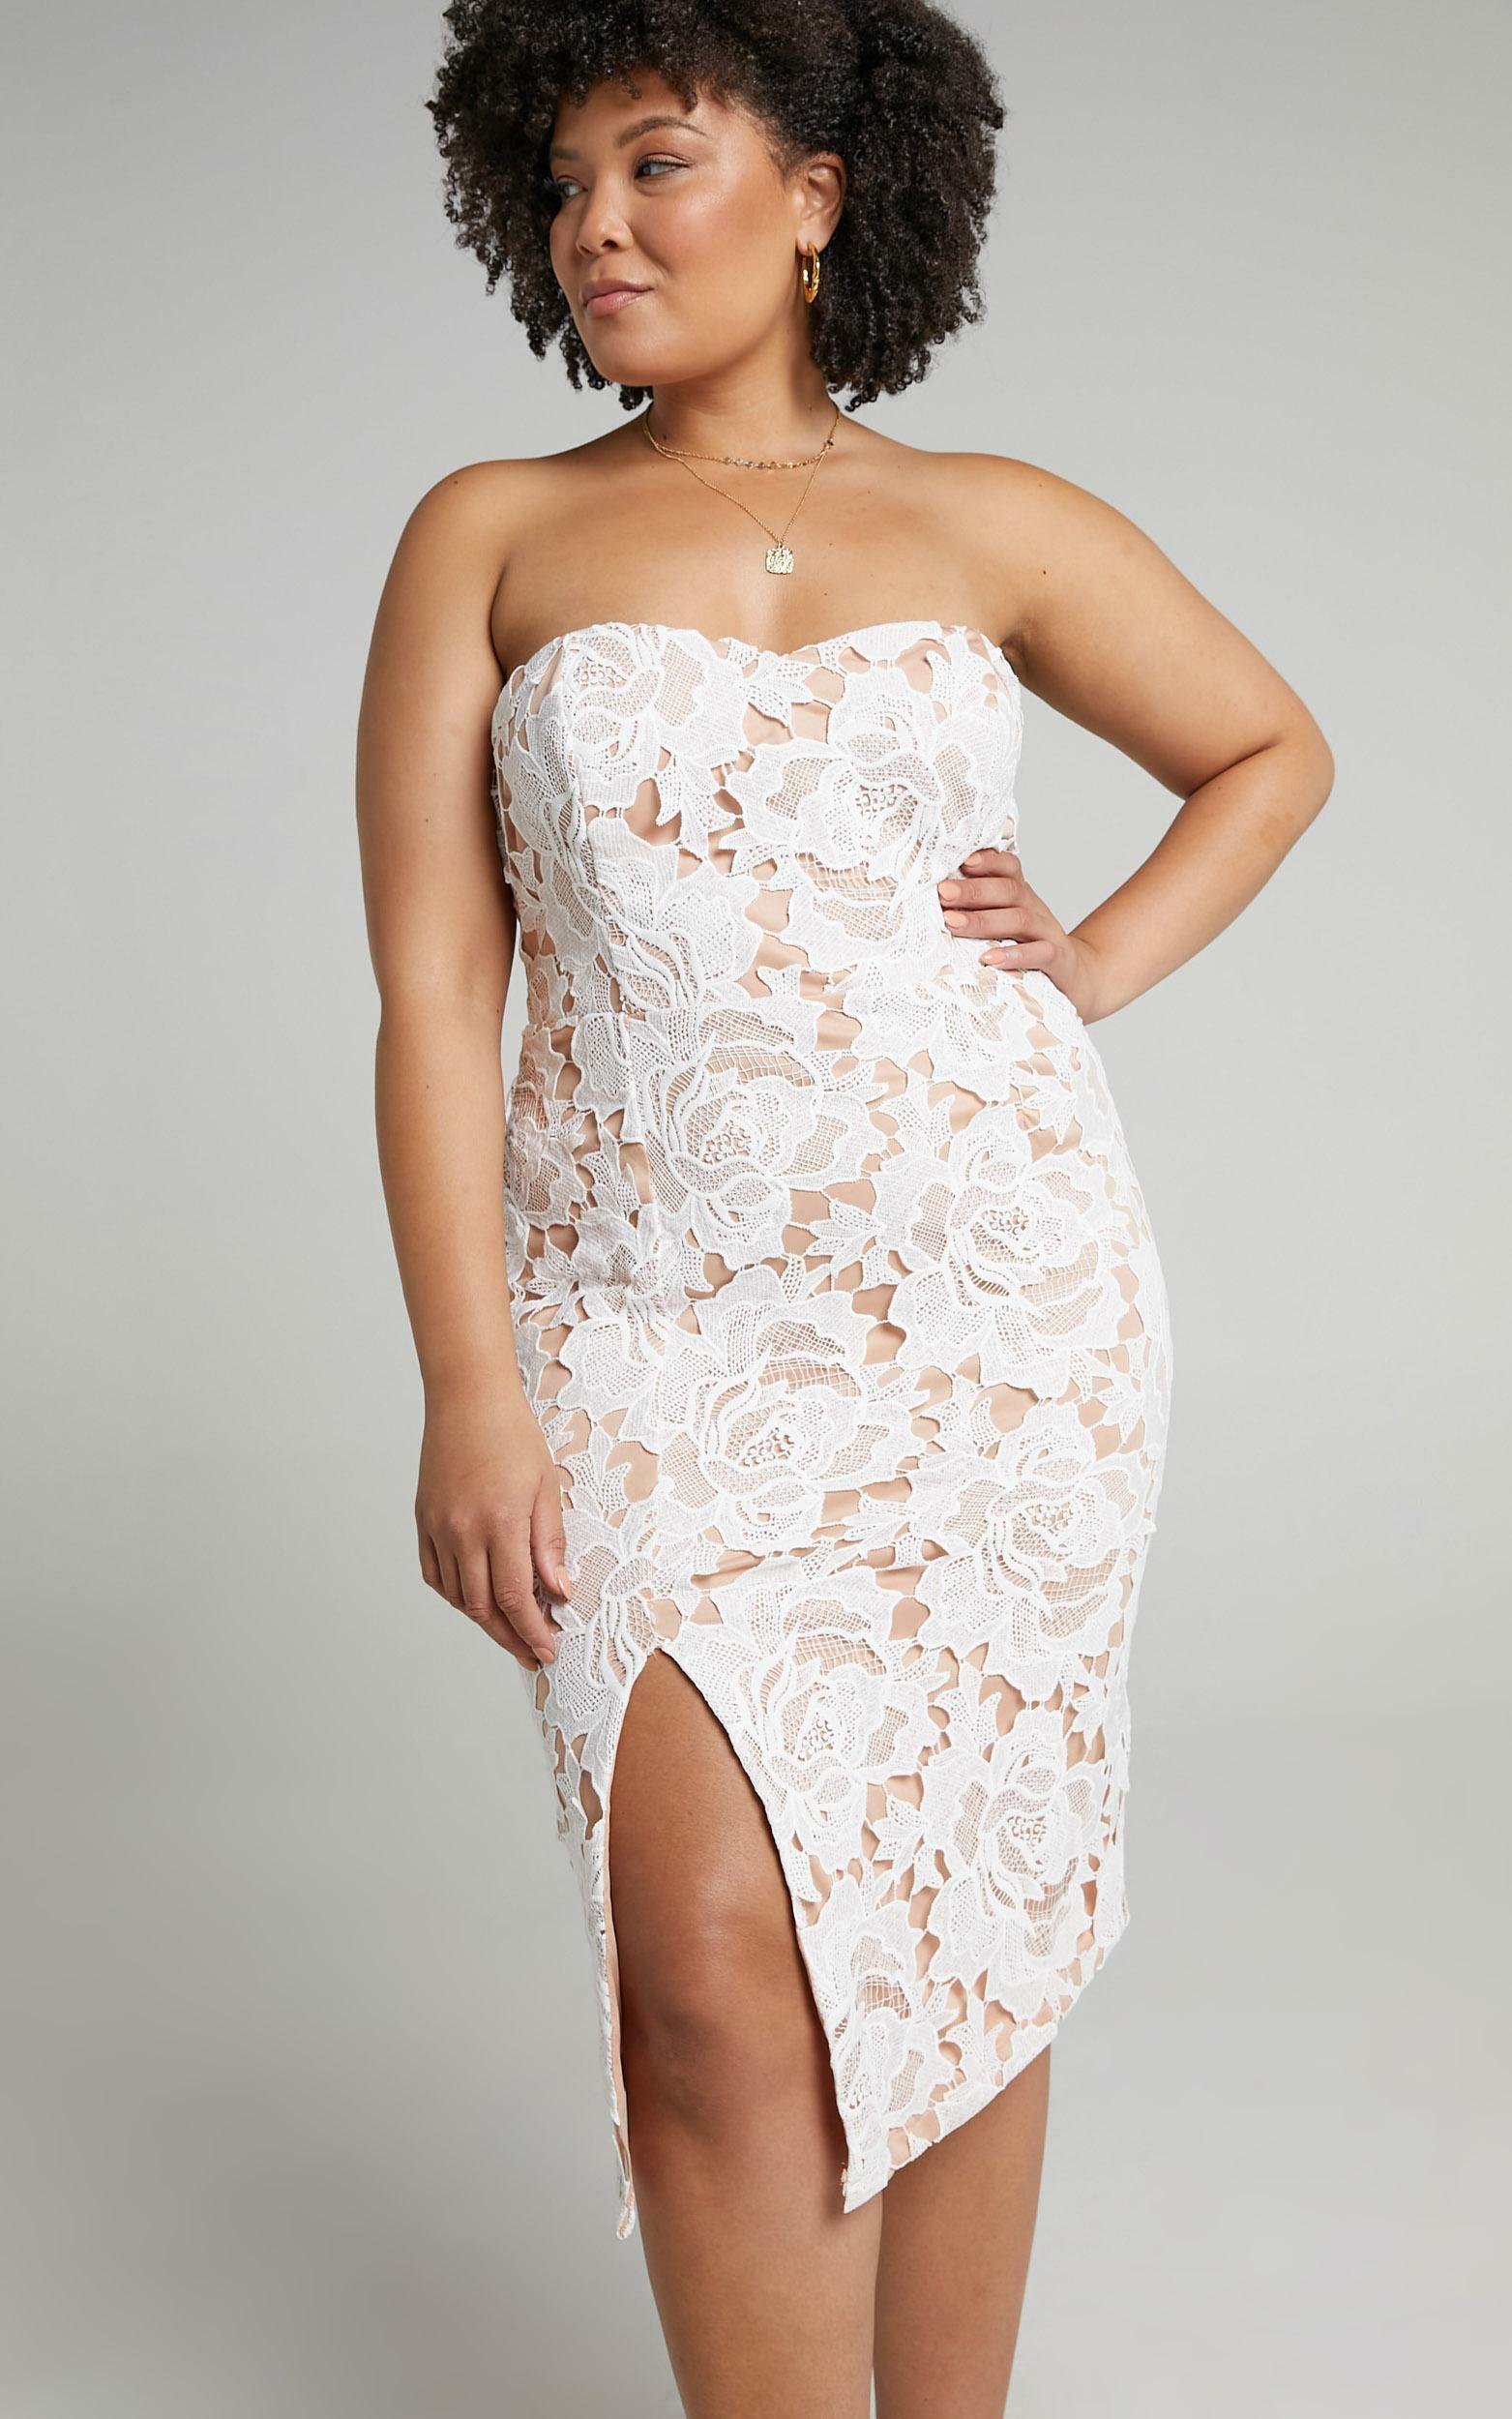 Lace To Lace Dress in White Lace - 20, WHT1, hi-res image number null